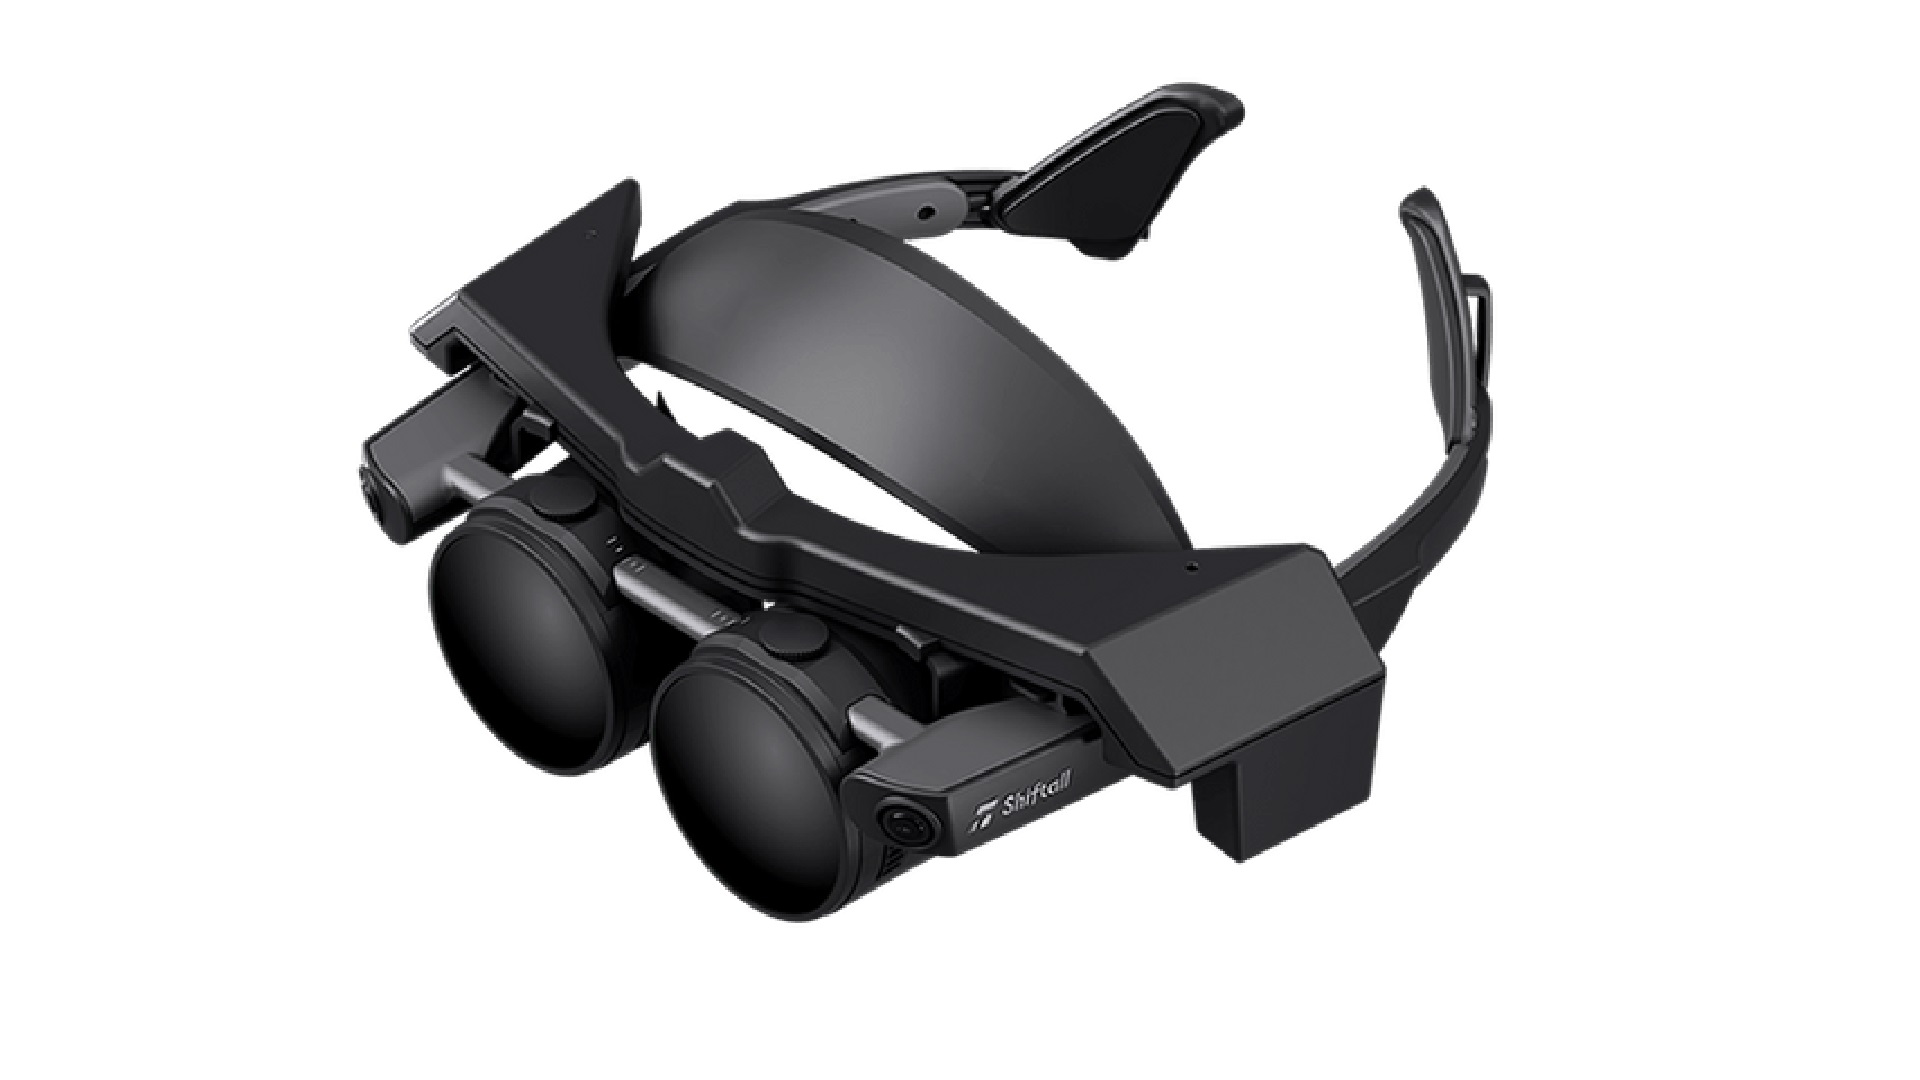 Shiftall’s Slim & Light PC VR Headset MeganeX to Launch Early 2023, Priced at $1,700 – Road to VR